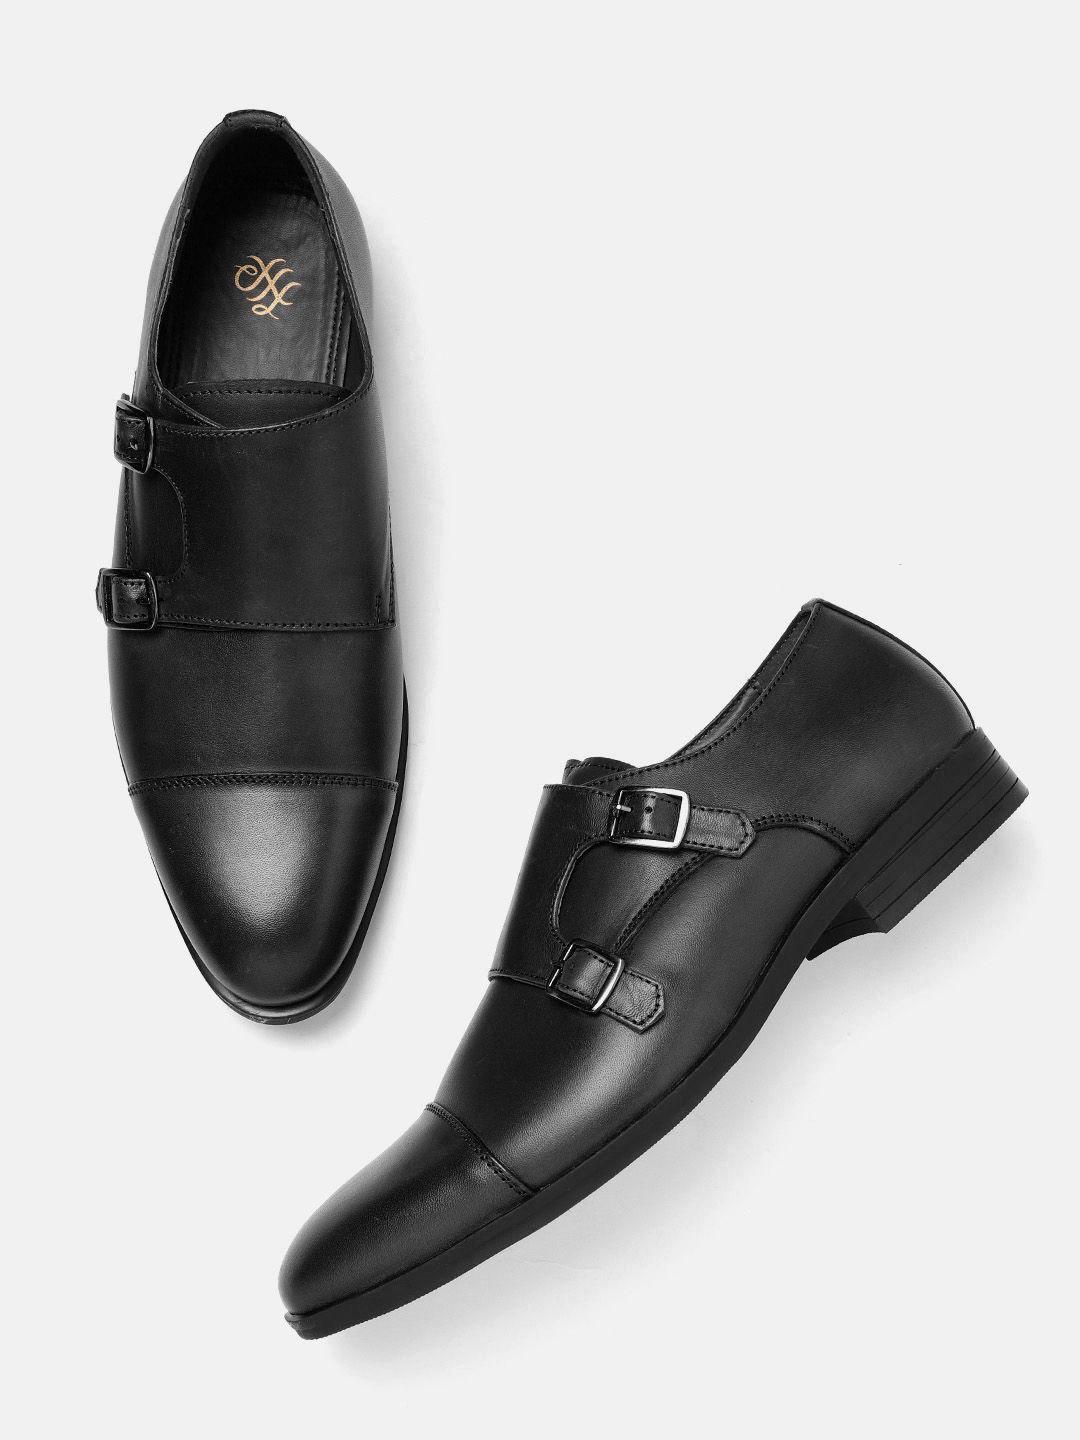 house of pataudi men black solid leather handcrafted formal monk shoes